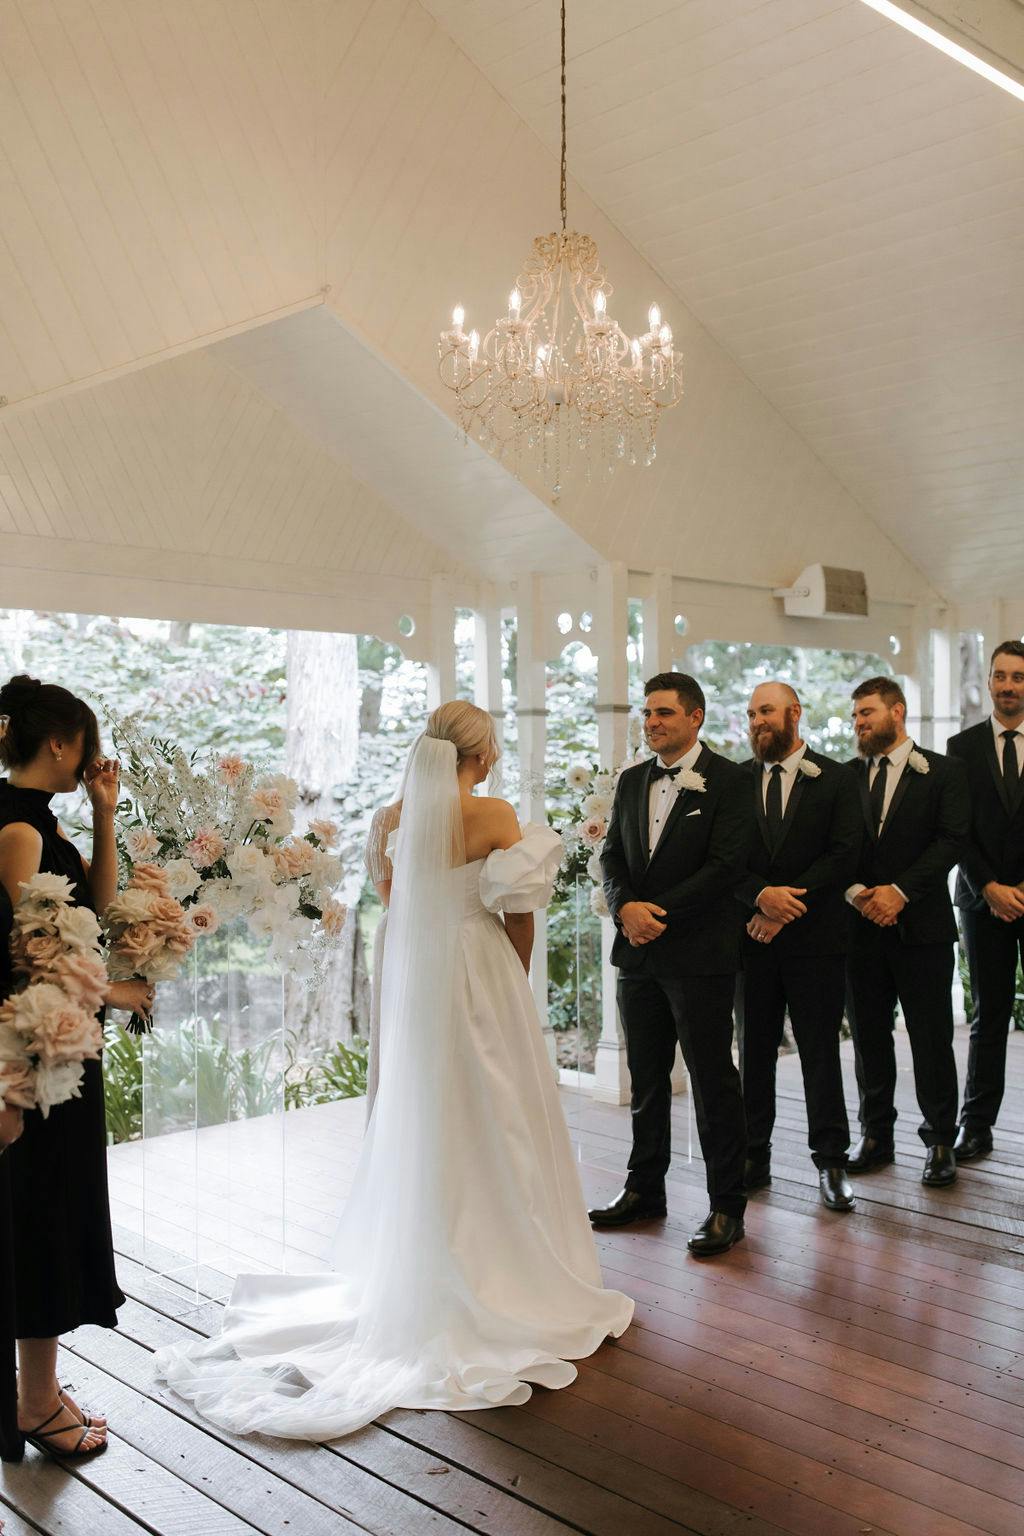 A bride in a white wedding gown stands facing the groom, who is dressed in a black tuxedo, at an indoor ceremony. The groom smiles with groomsmen in black suits standing beside him. A bridesmaid holds flower arrangements on the left, beneath a chandelier.